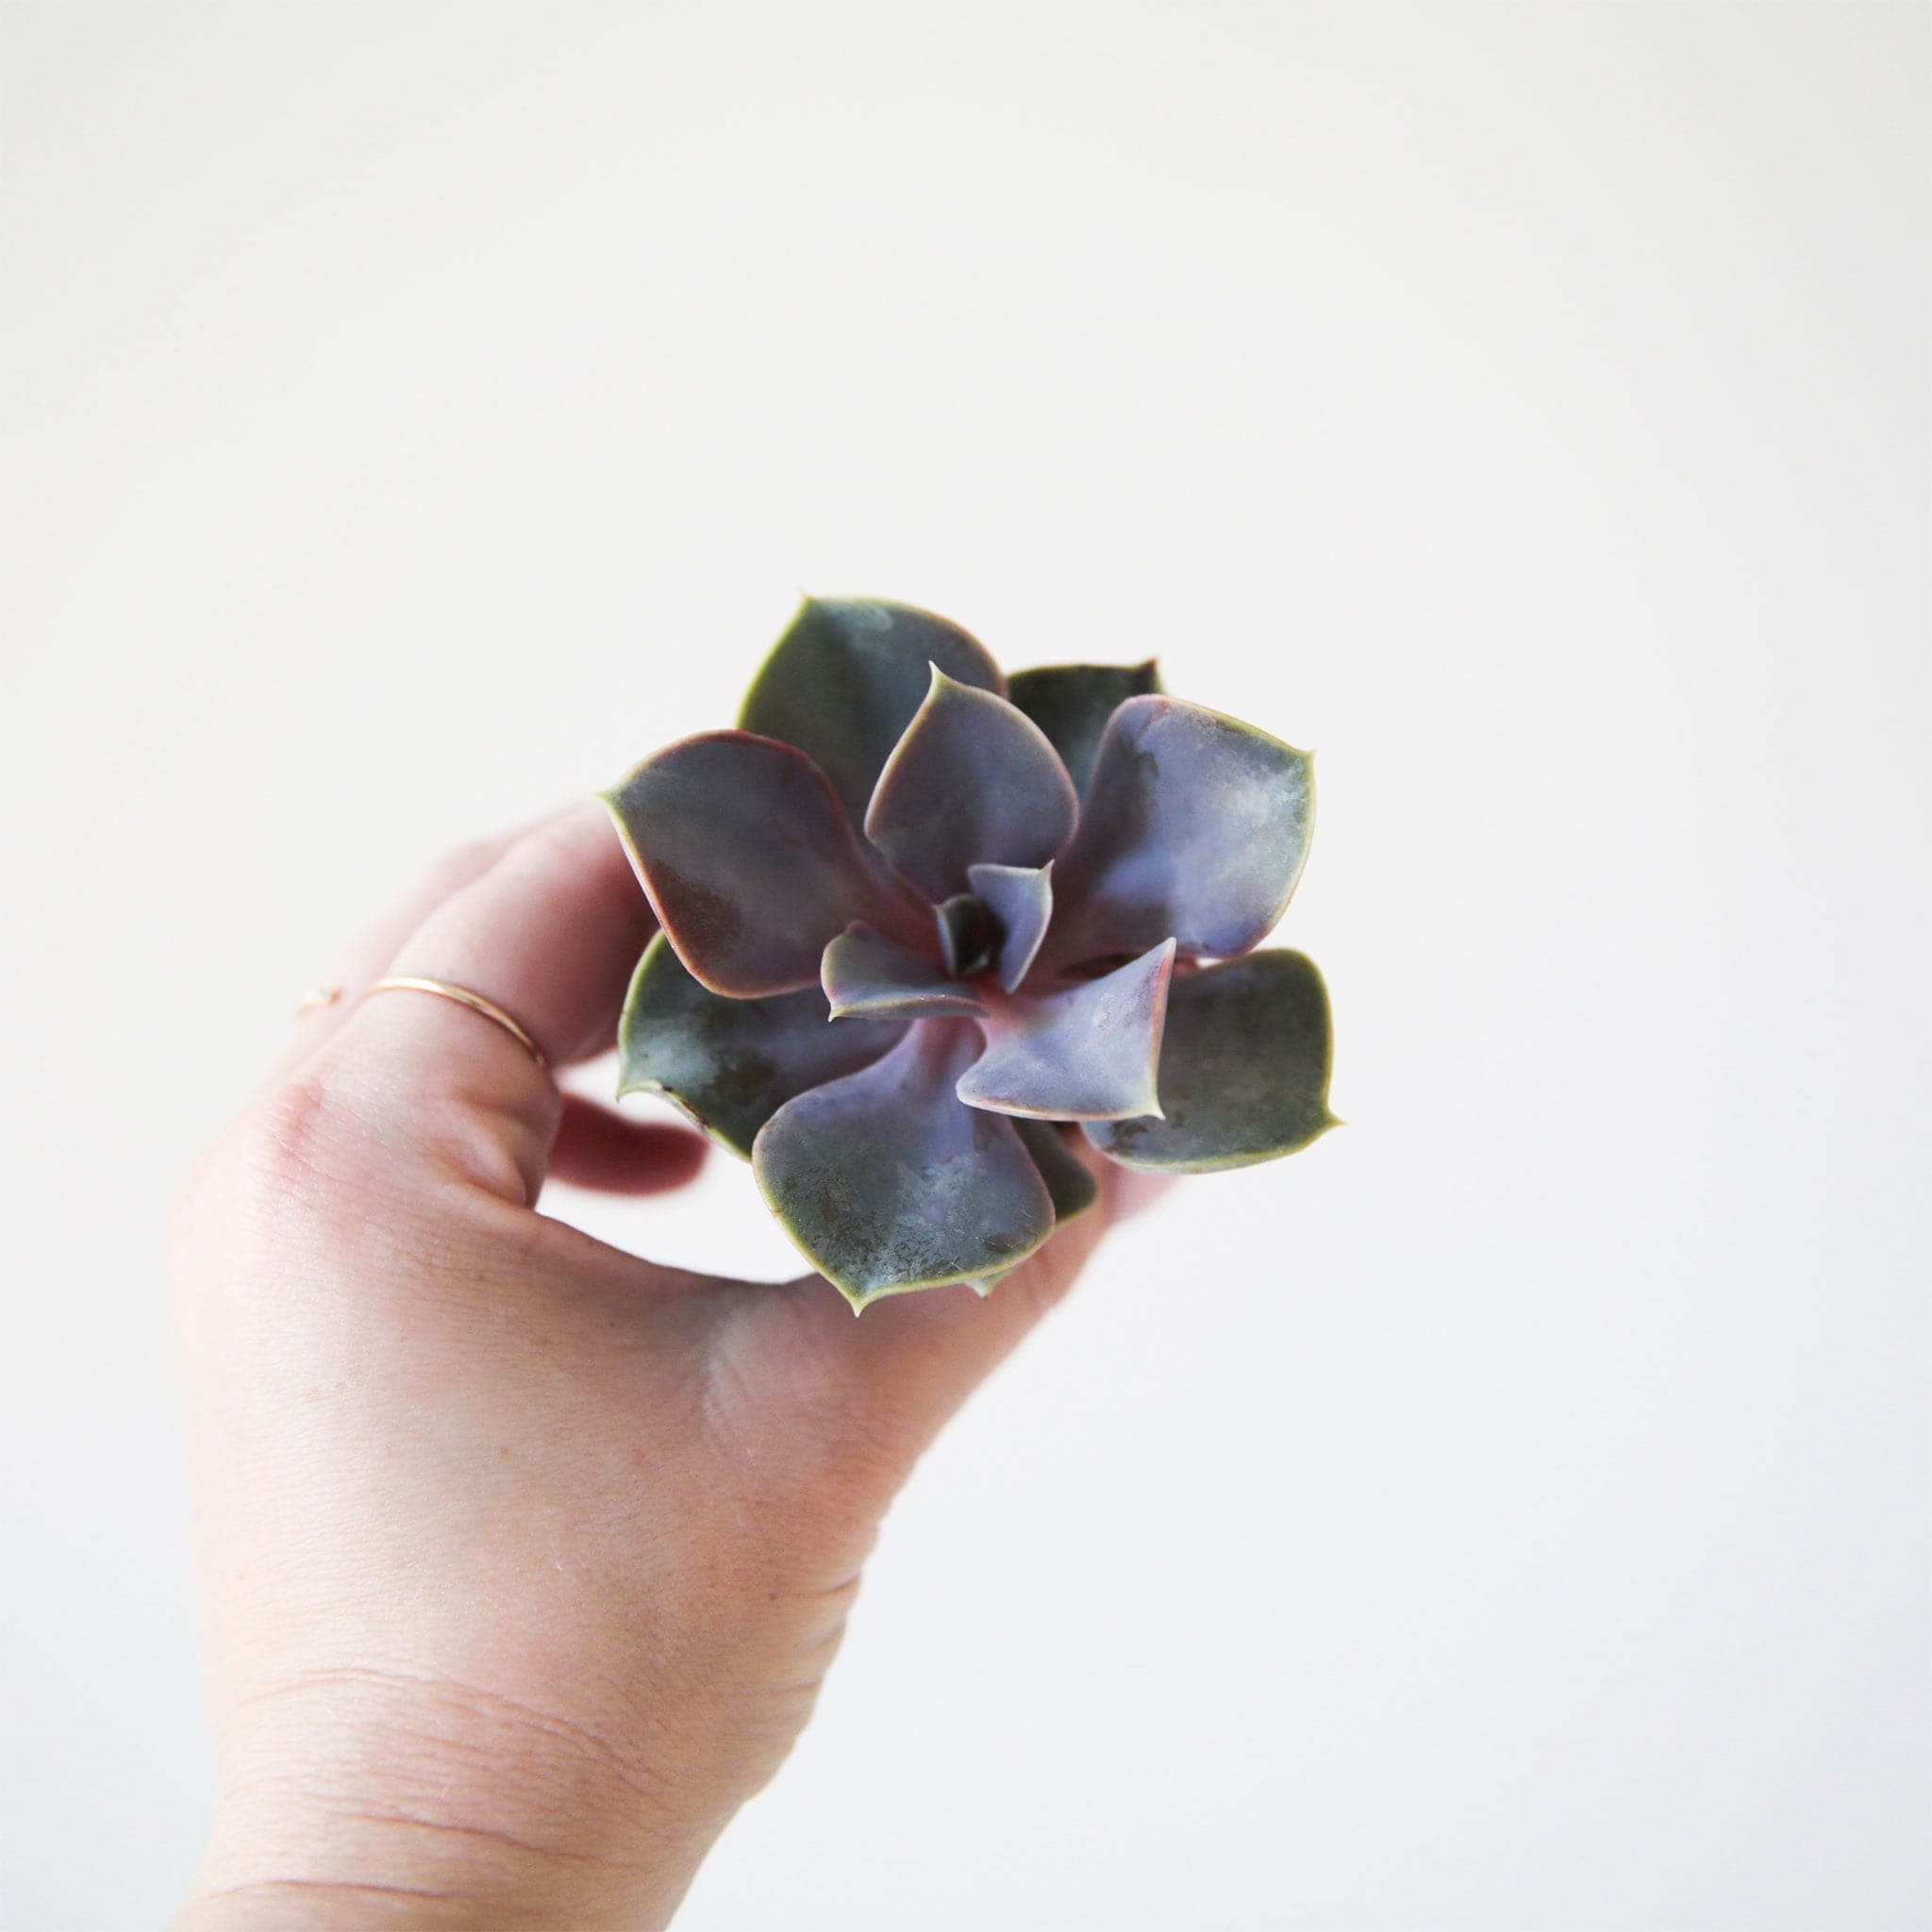 On a white background is a Echeveria Perle Von Nurnberg succulent with multi colored leaves. Each succulent varies in shape and color.